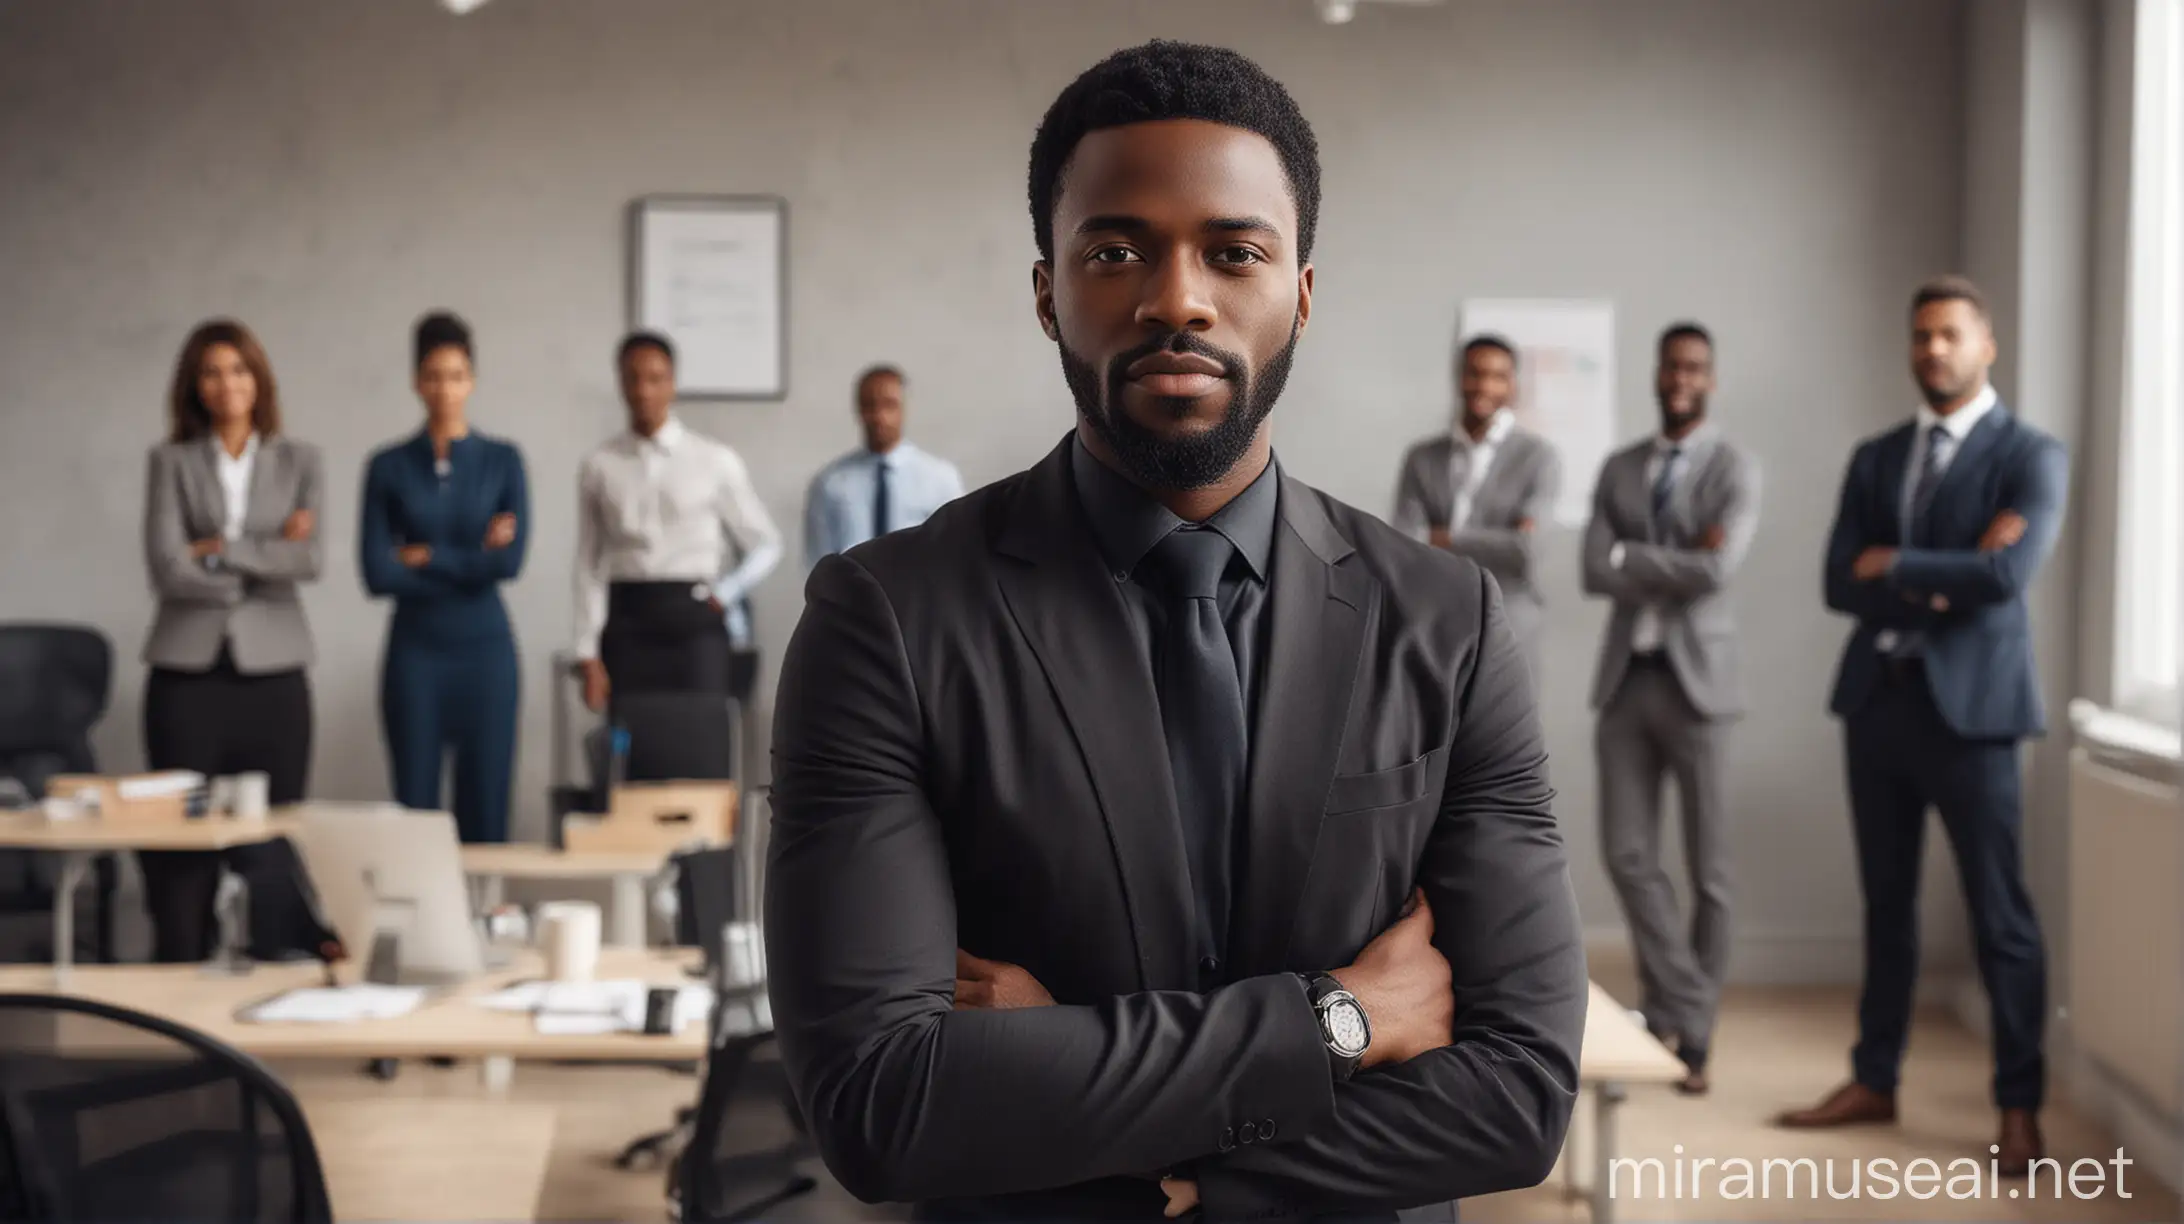 A PICTURE OF A BLACK OFFICE MAN STANDING OUT AS THE BEST FROM OTHERS WITH A BEAUTIFUL OFFICE BACKGROUND